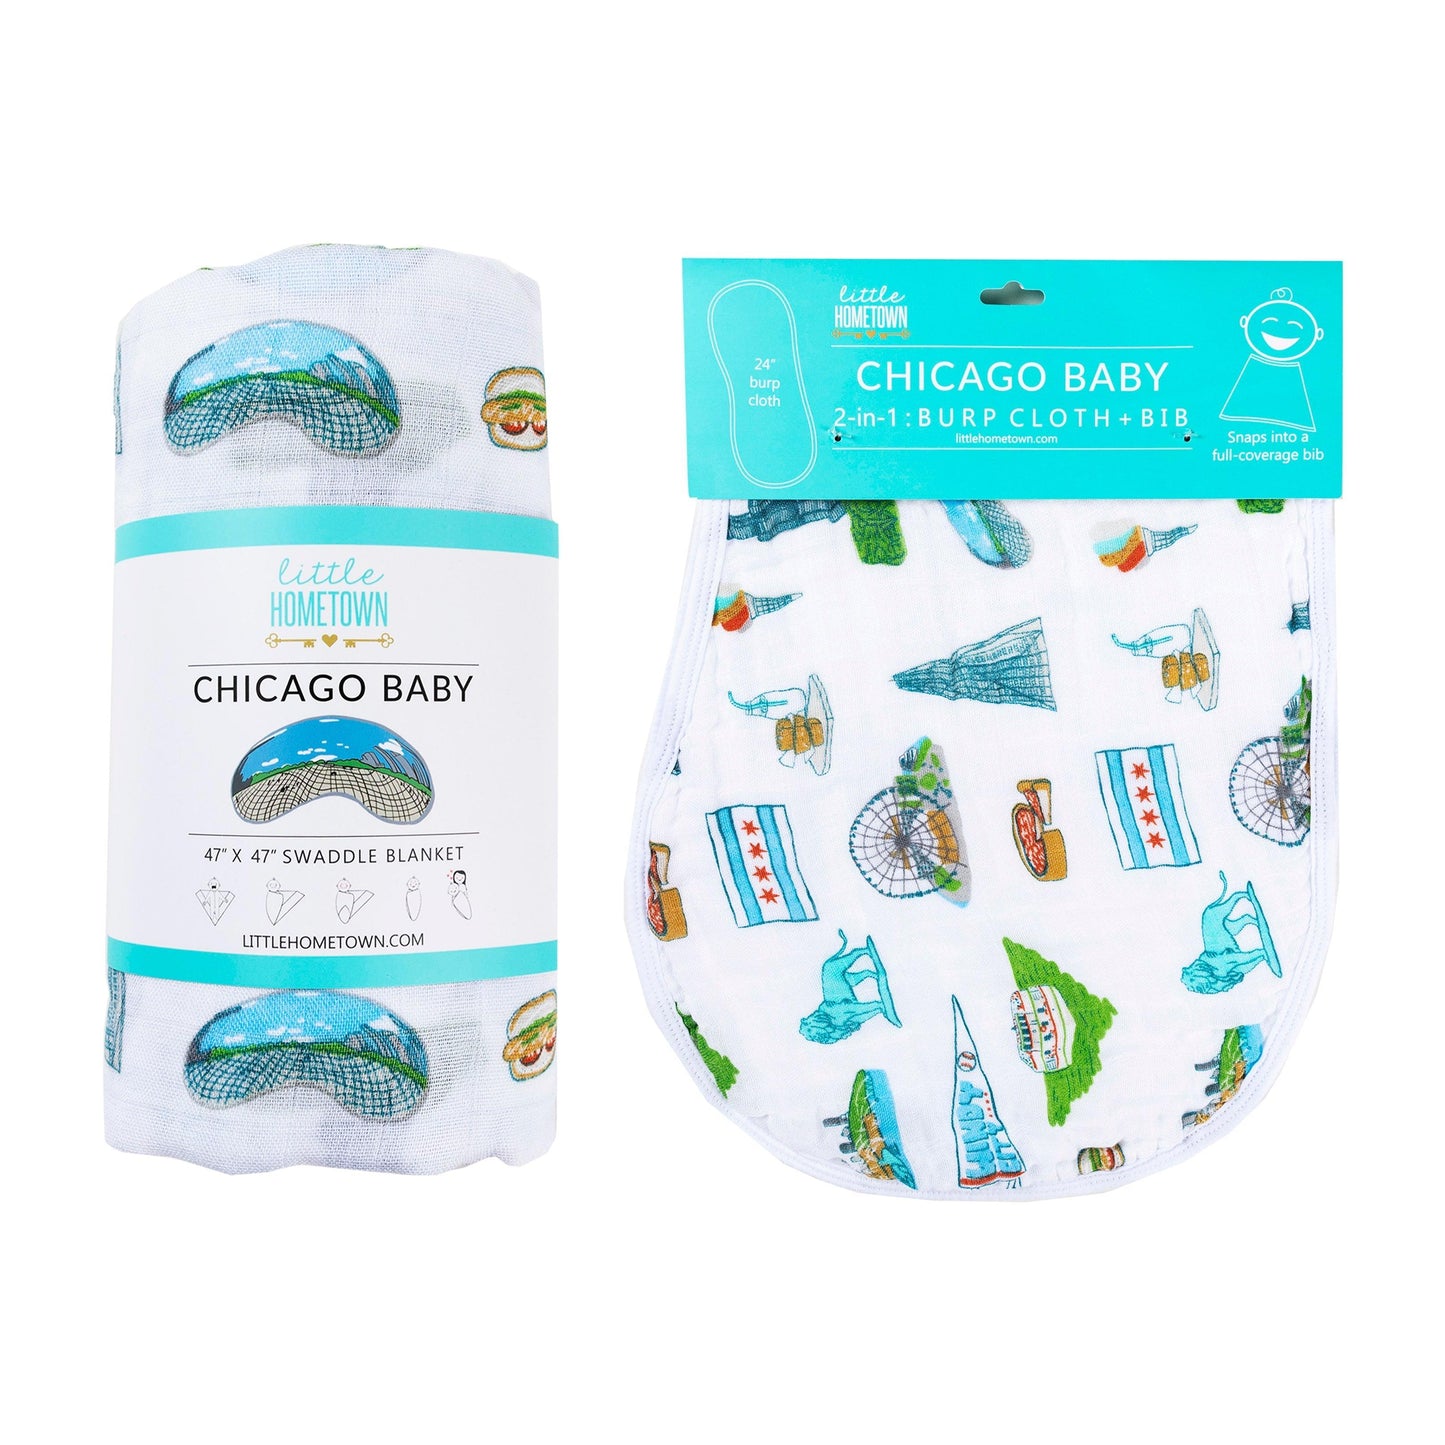 Chicago-themed baby gift set with muslin swaddle blanket and burp cloth/bib combo, featuring city landmarks.